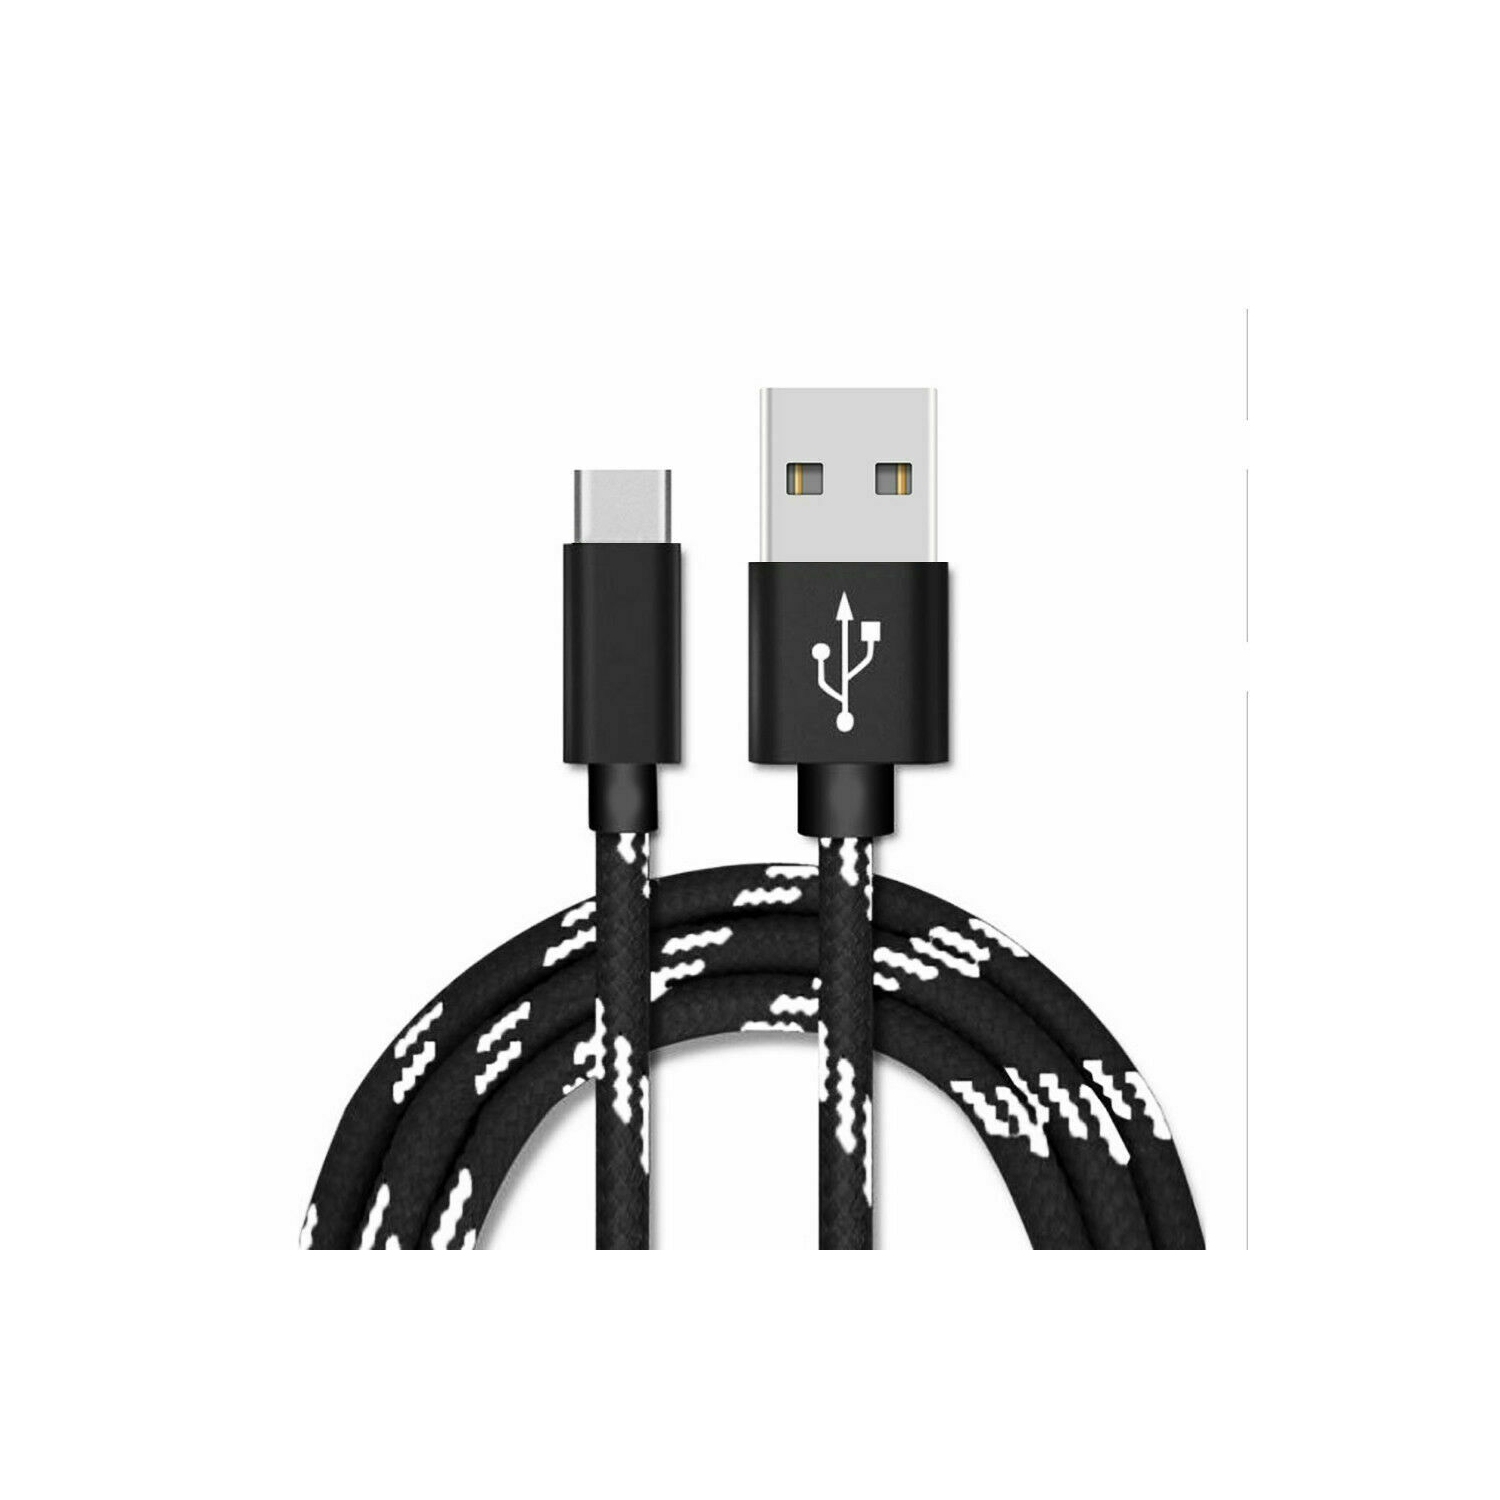 SuperShield USB C Cable USB Type C to USB 3.0 Charging Cable Fast Charger Cord for Samsung Galaxy S23 S22 S21 S20, S10, S9, Note 20 10, S8, S8 A71 A51 A52 A72 A53 A73 Pixel Tab